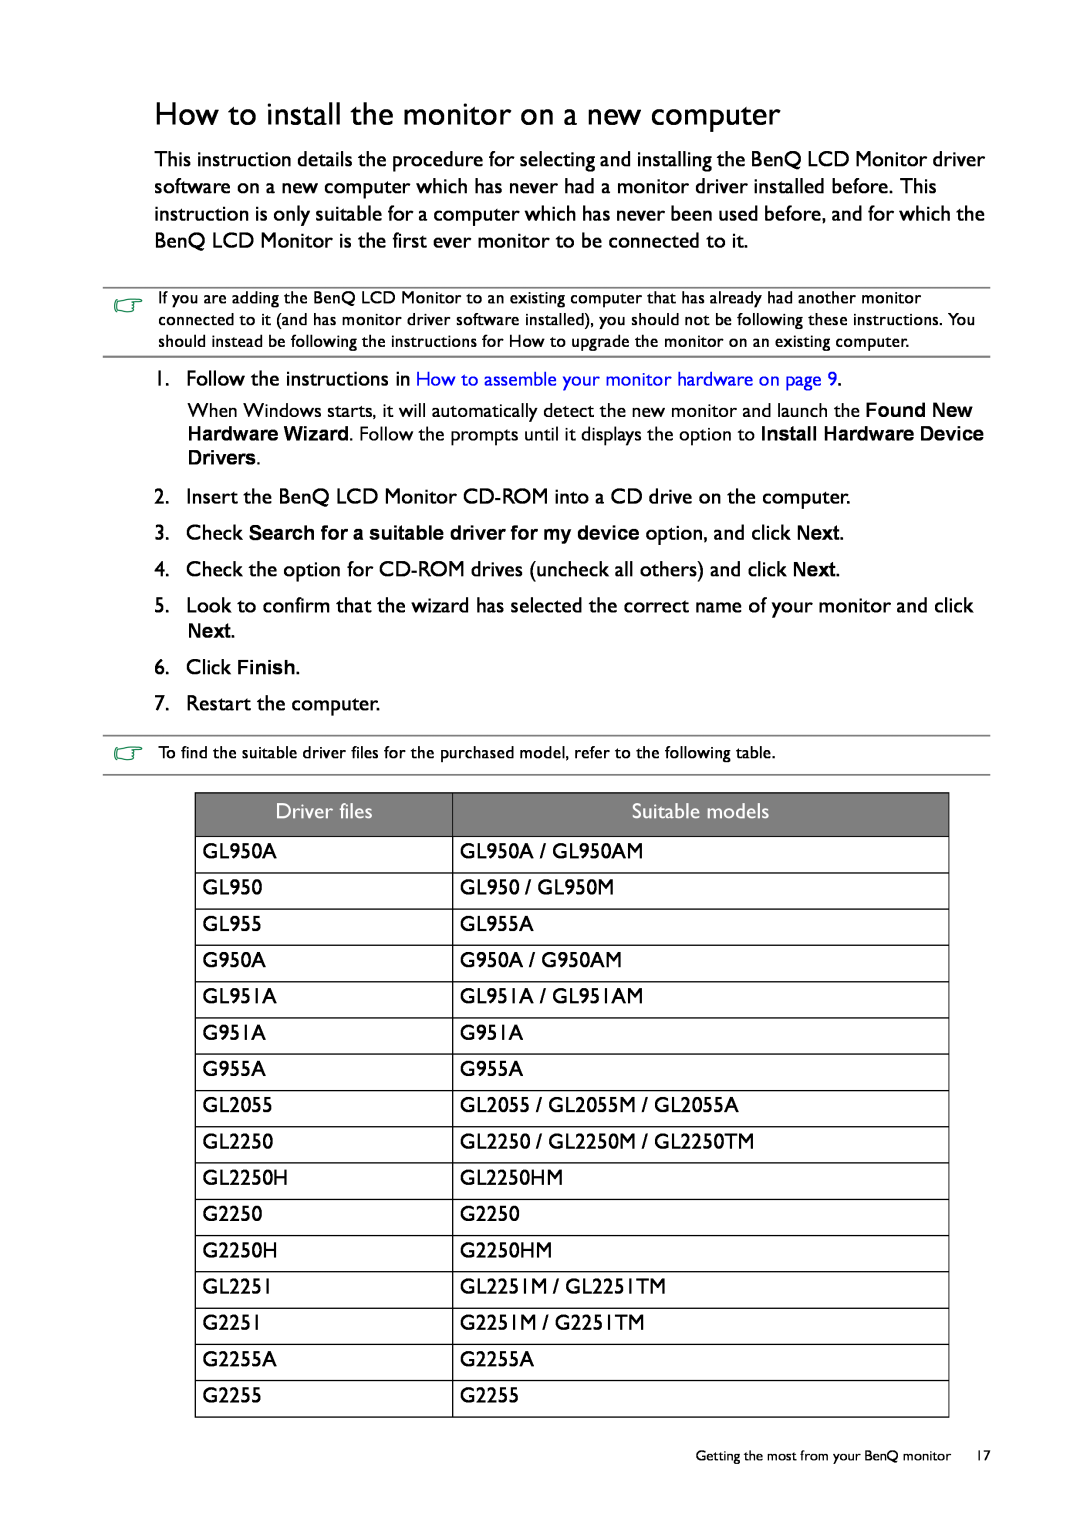 BenQ GL50, G50 user manual How to install the monitor on a new computer, Driver files, Suitable models 